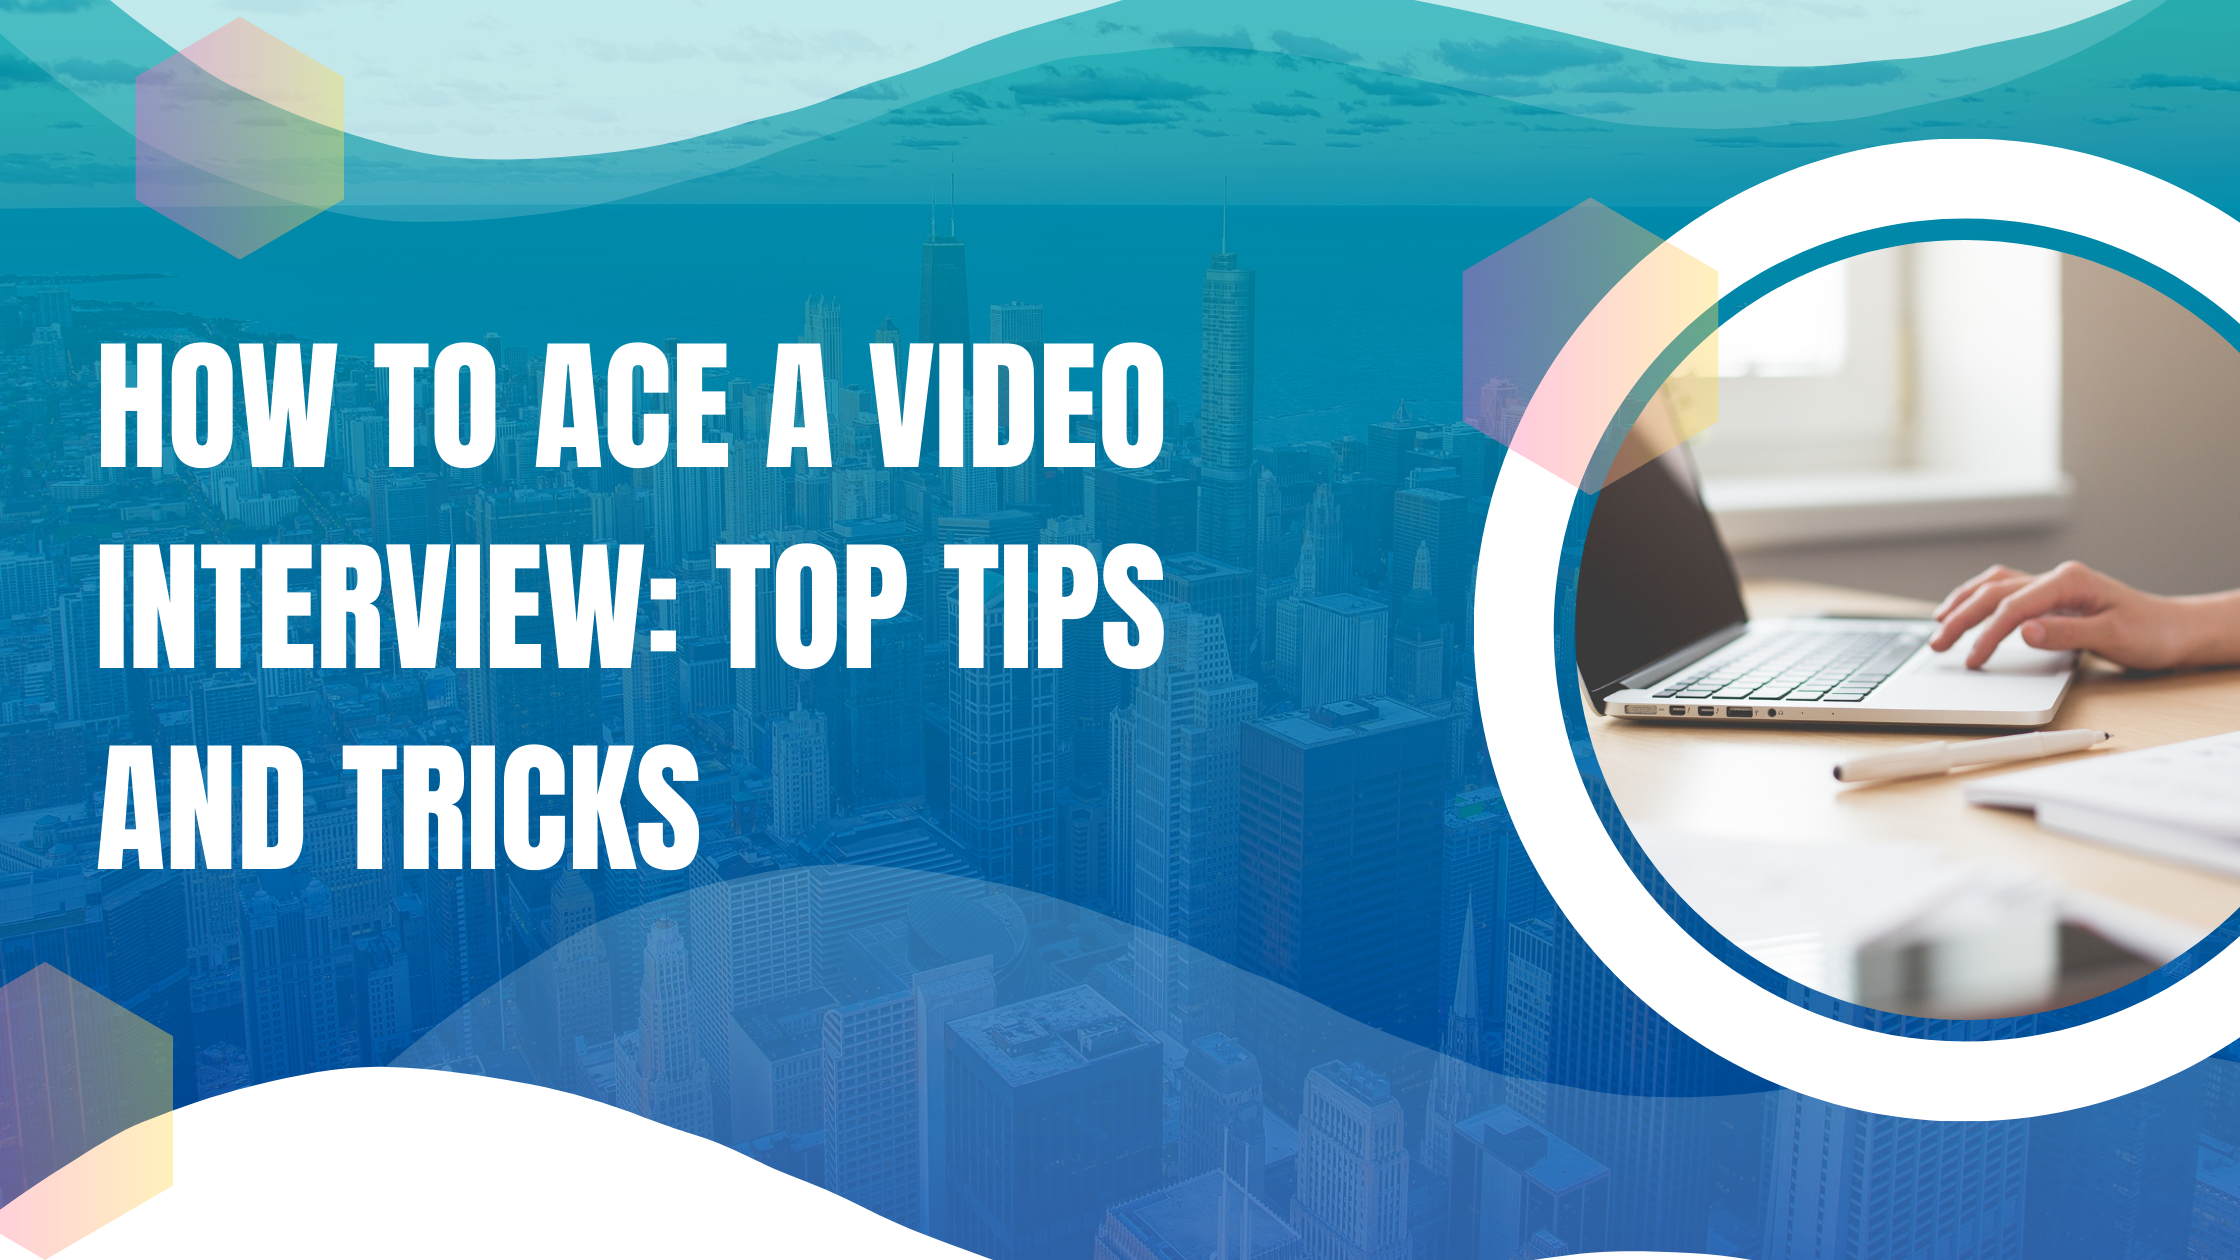 How to Ace a Video Interview: Top Tips and Tricks